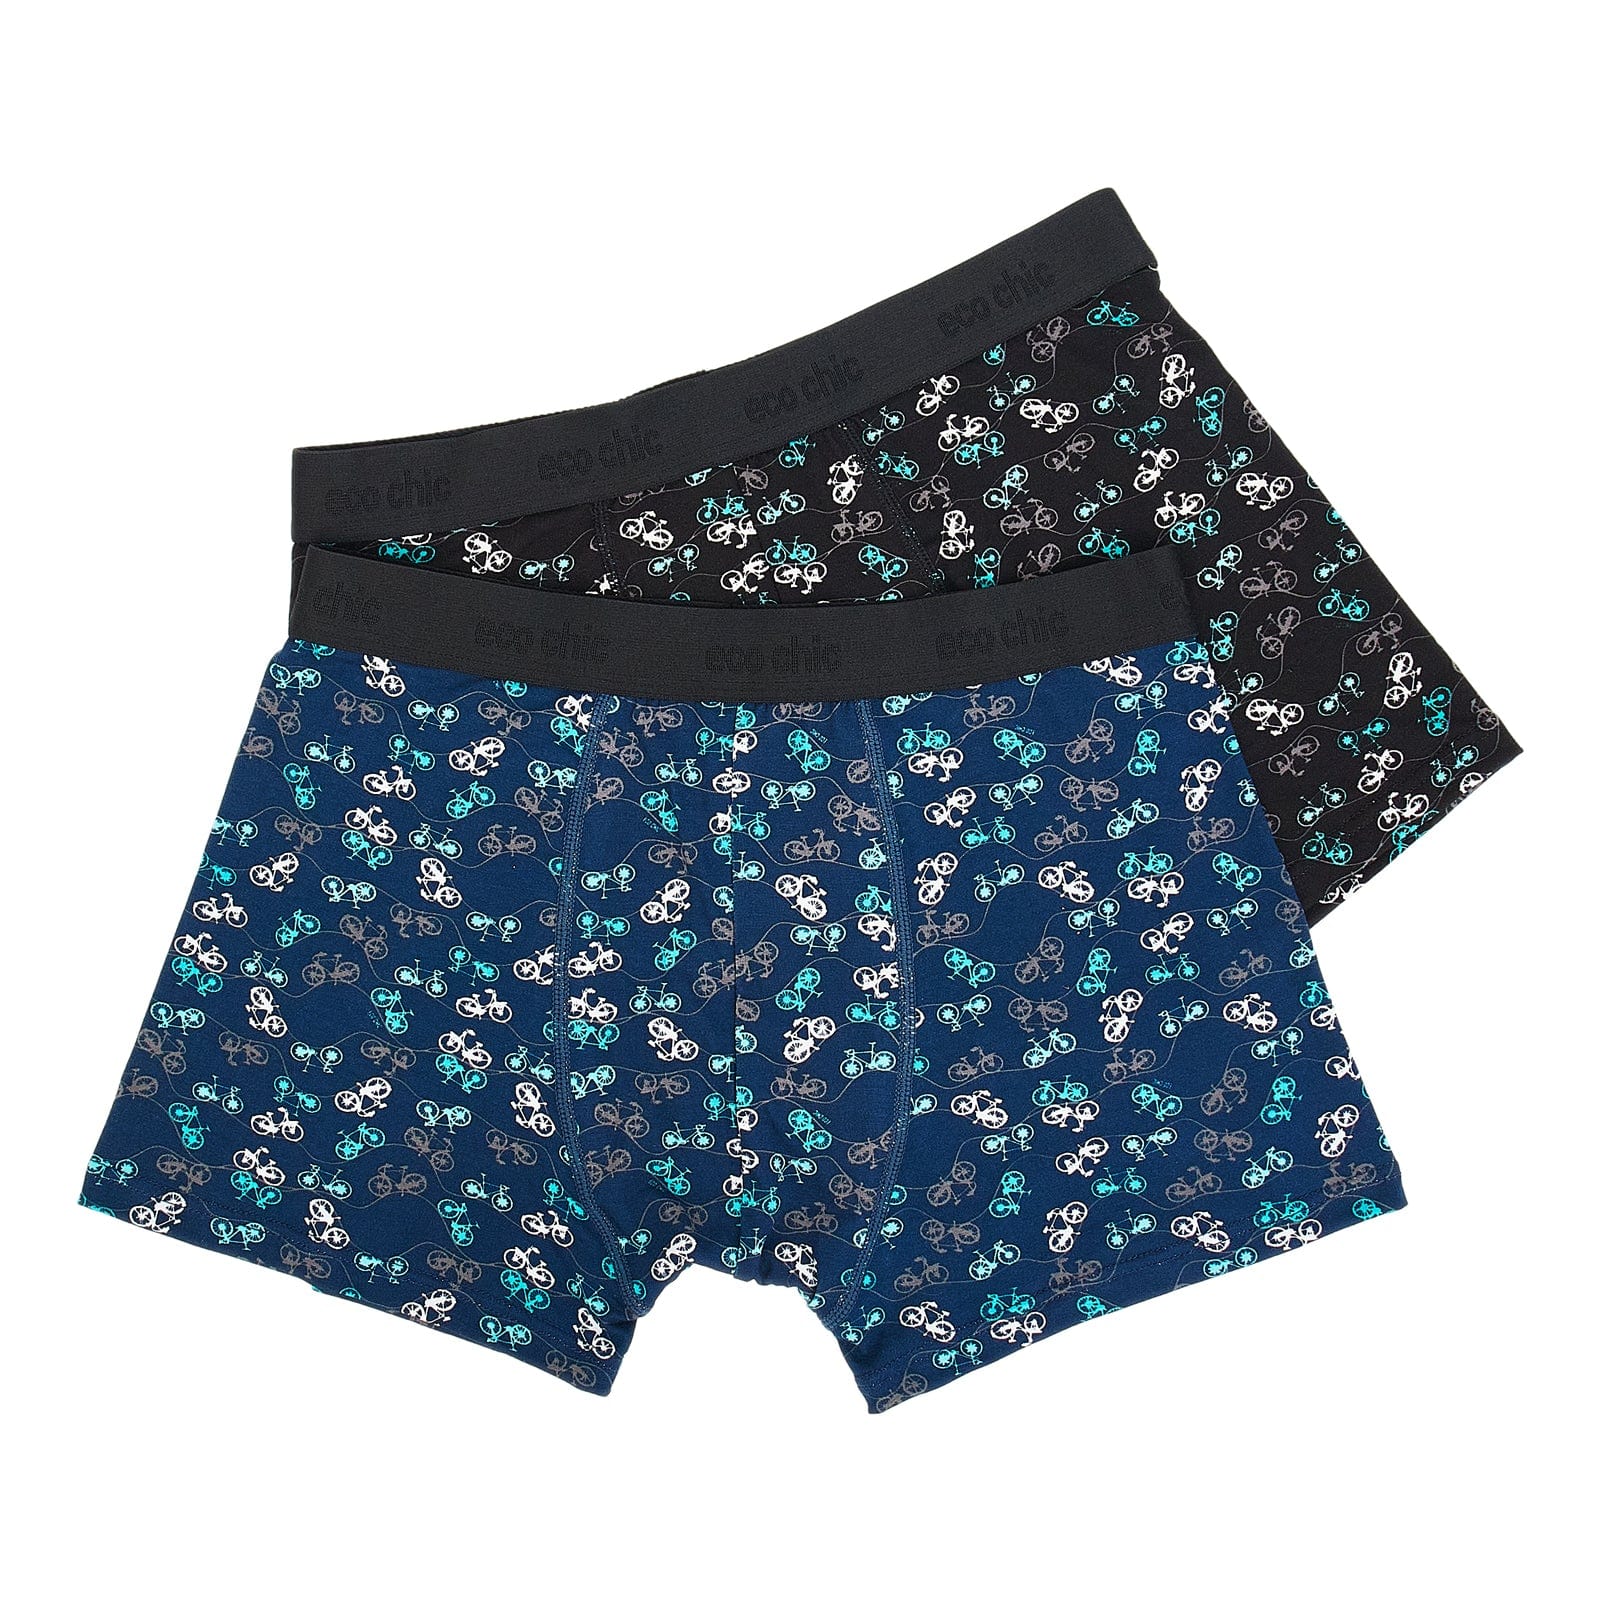 EcoBamboo boxers with shorter leg